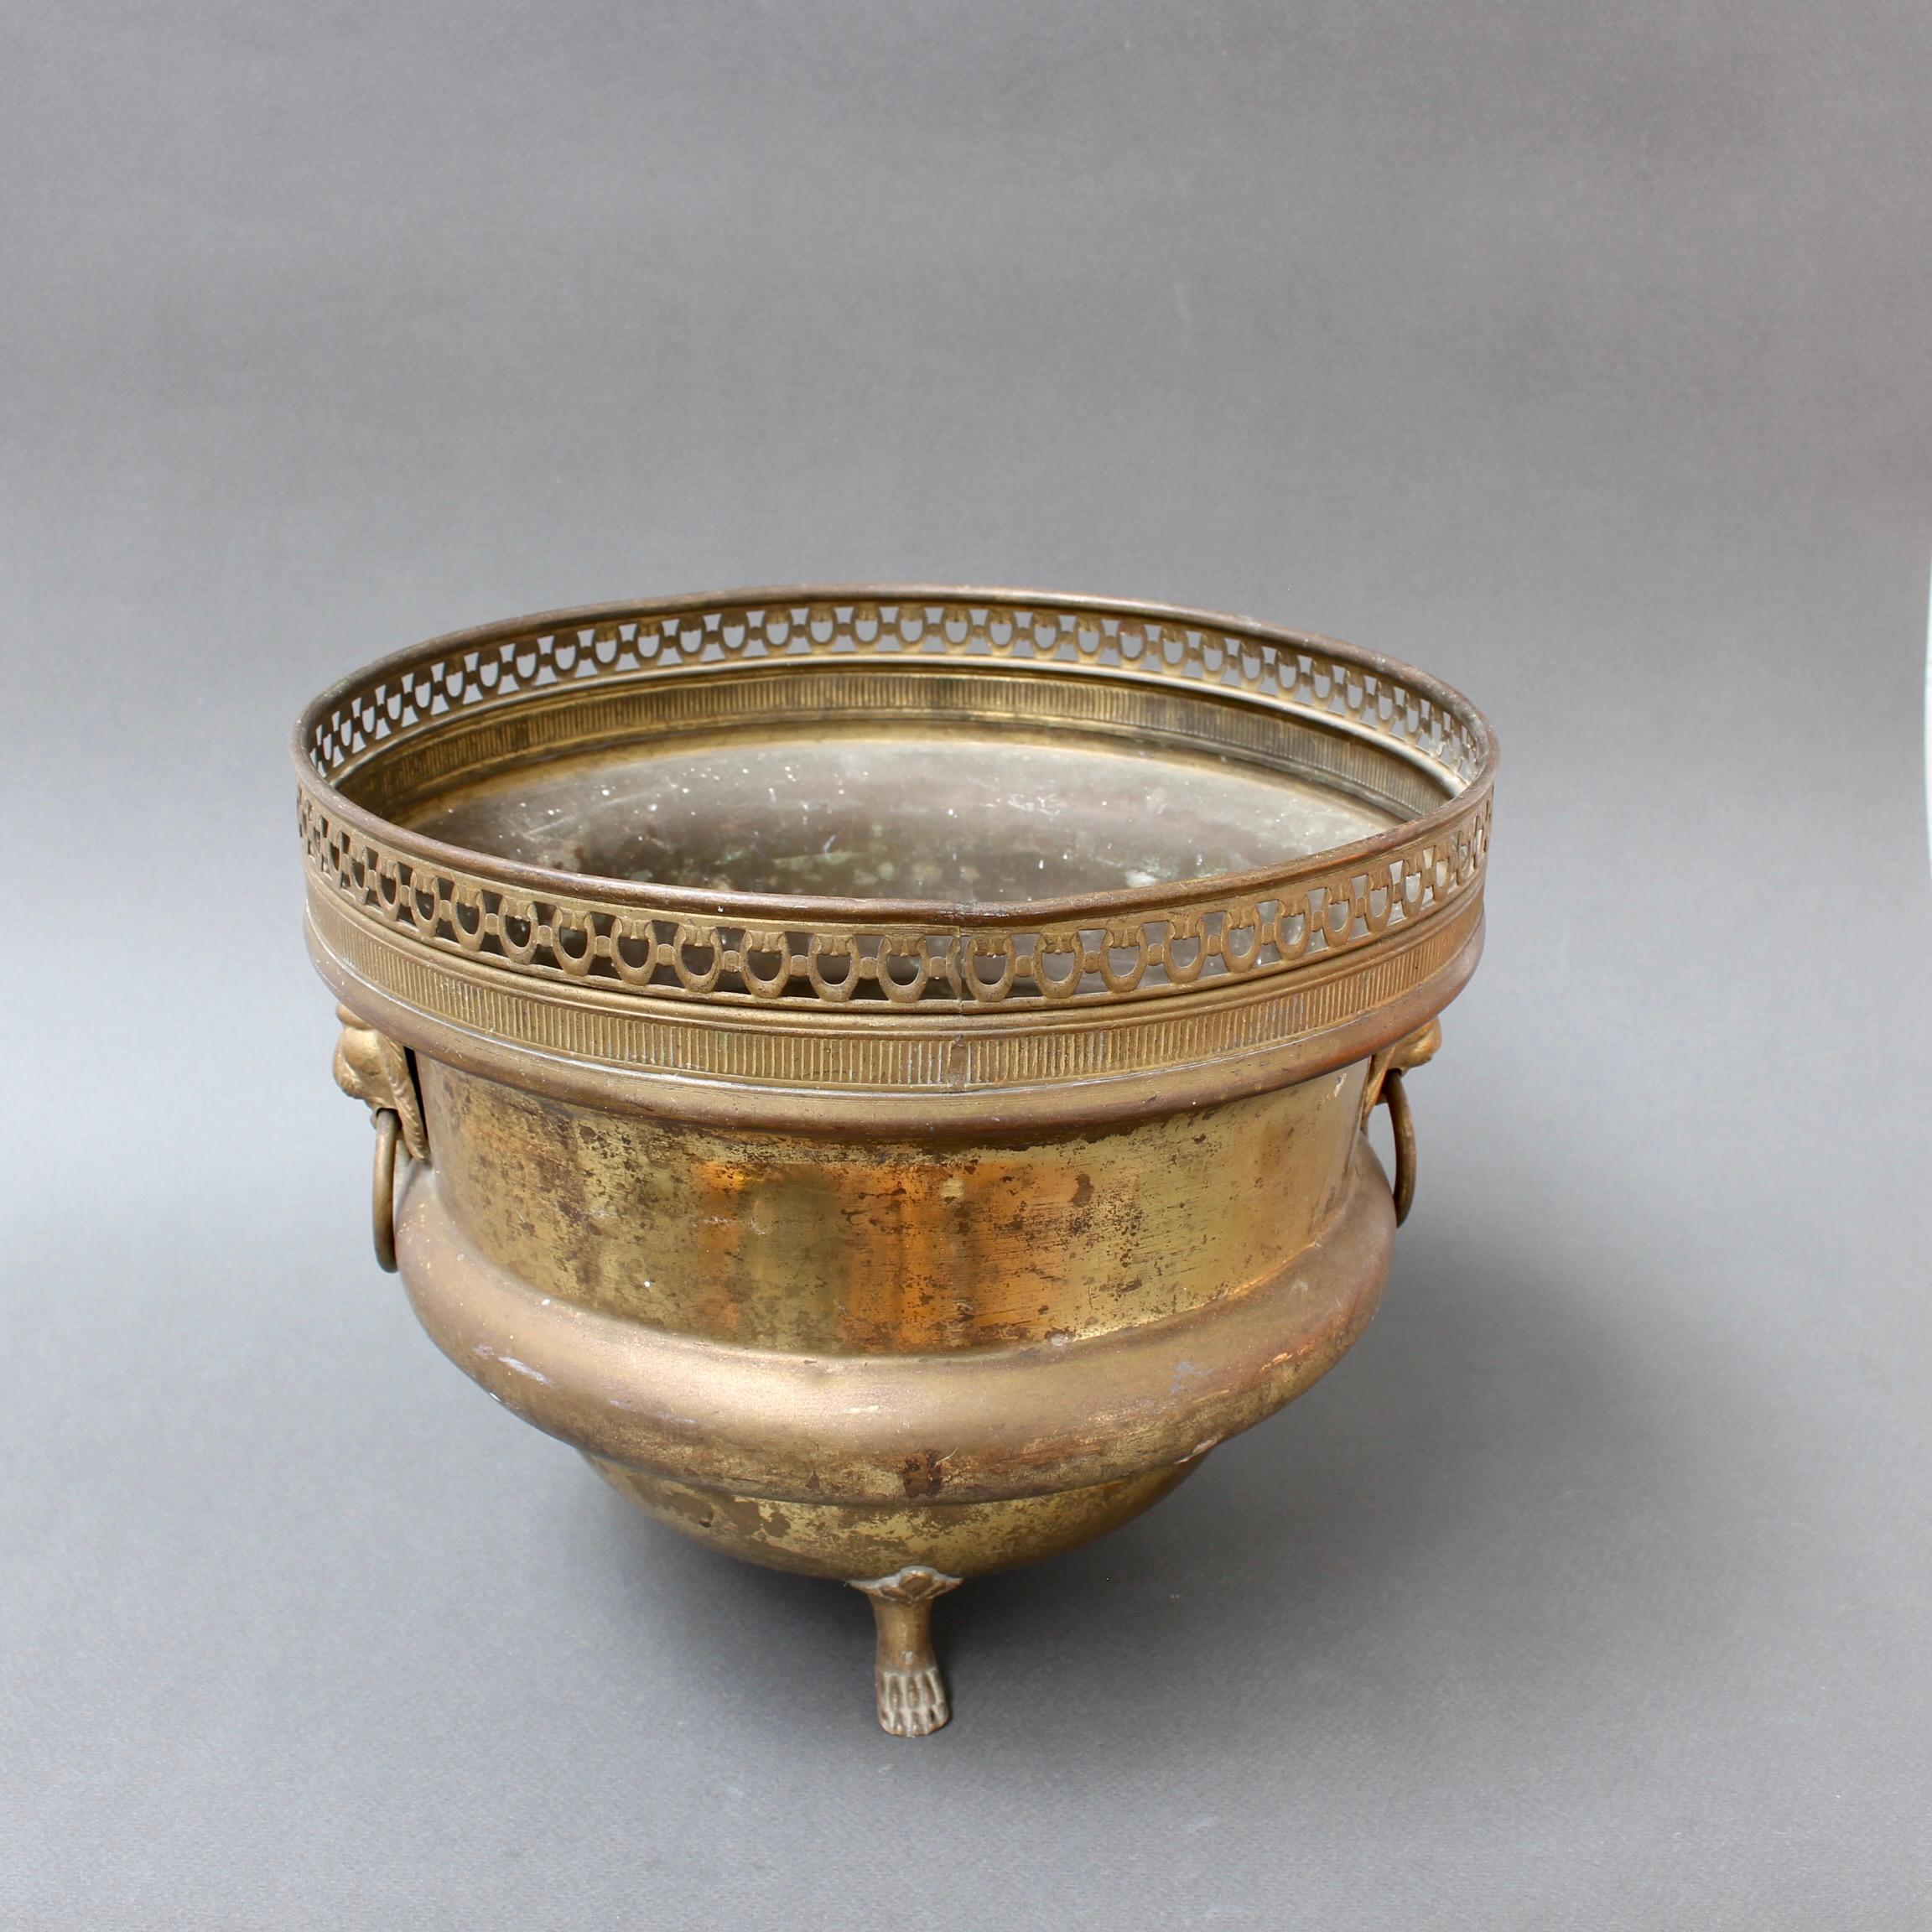 Vintage 3-legged French brass ice bucket or cachepot (circa 1940s). Lion motif handles with rings on two sides accent this wonderful vintage piece with three monopodium (animal paw) style feet. The piece was originally intended to be used as an ice